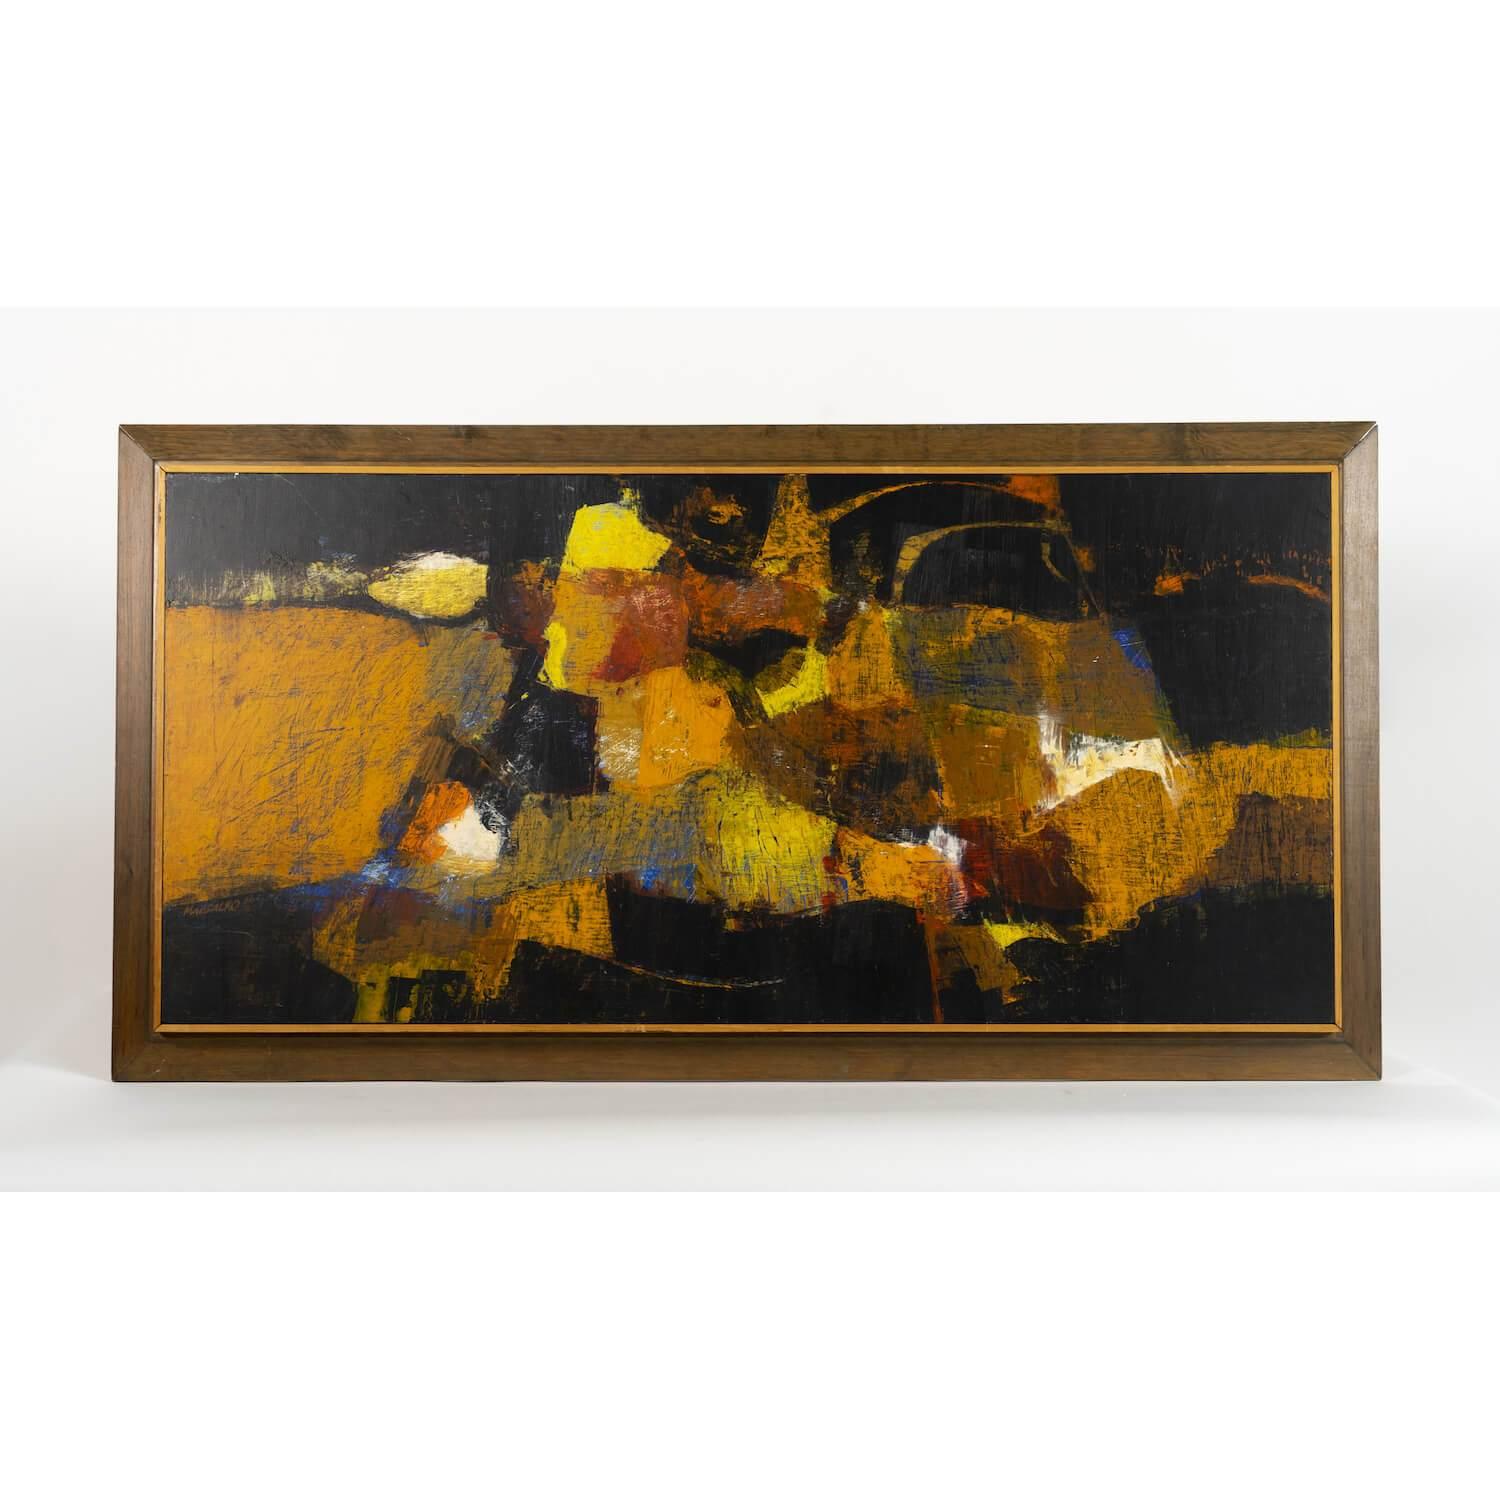 Marsalko abstract oil painting on wood features a palette of black, orange, yellow and blue. It is presented without glass and framed in a wooden molding, typical of the period. It is signed 